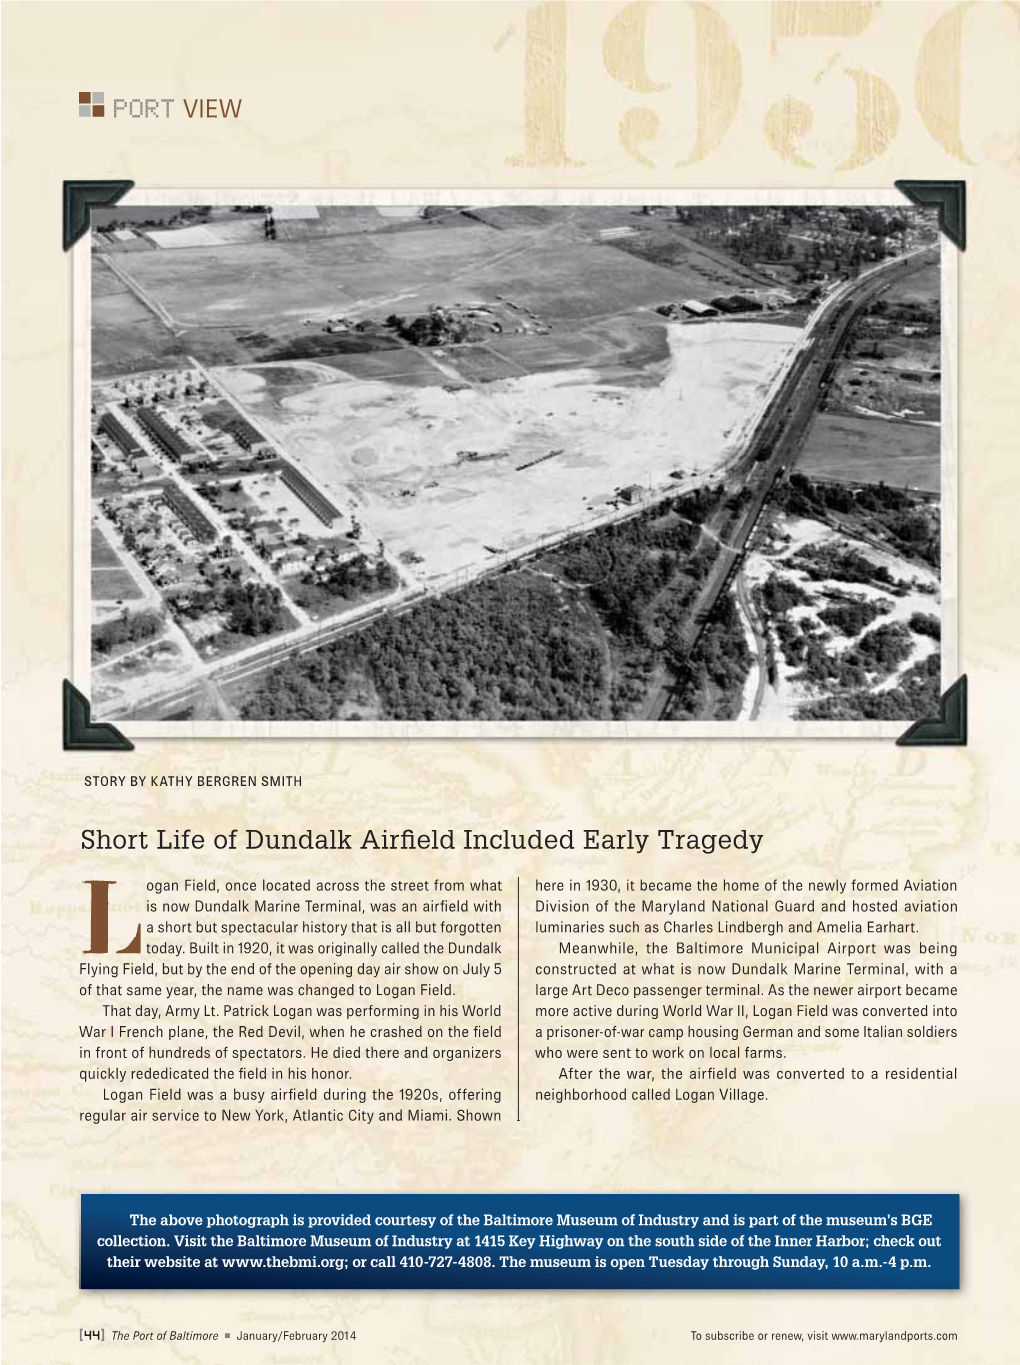 Short Life of Dundalk Airfield Included Early Tragedy